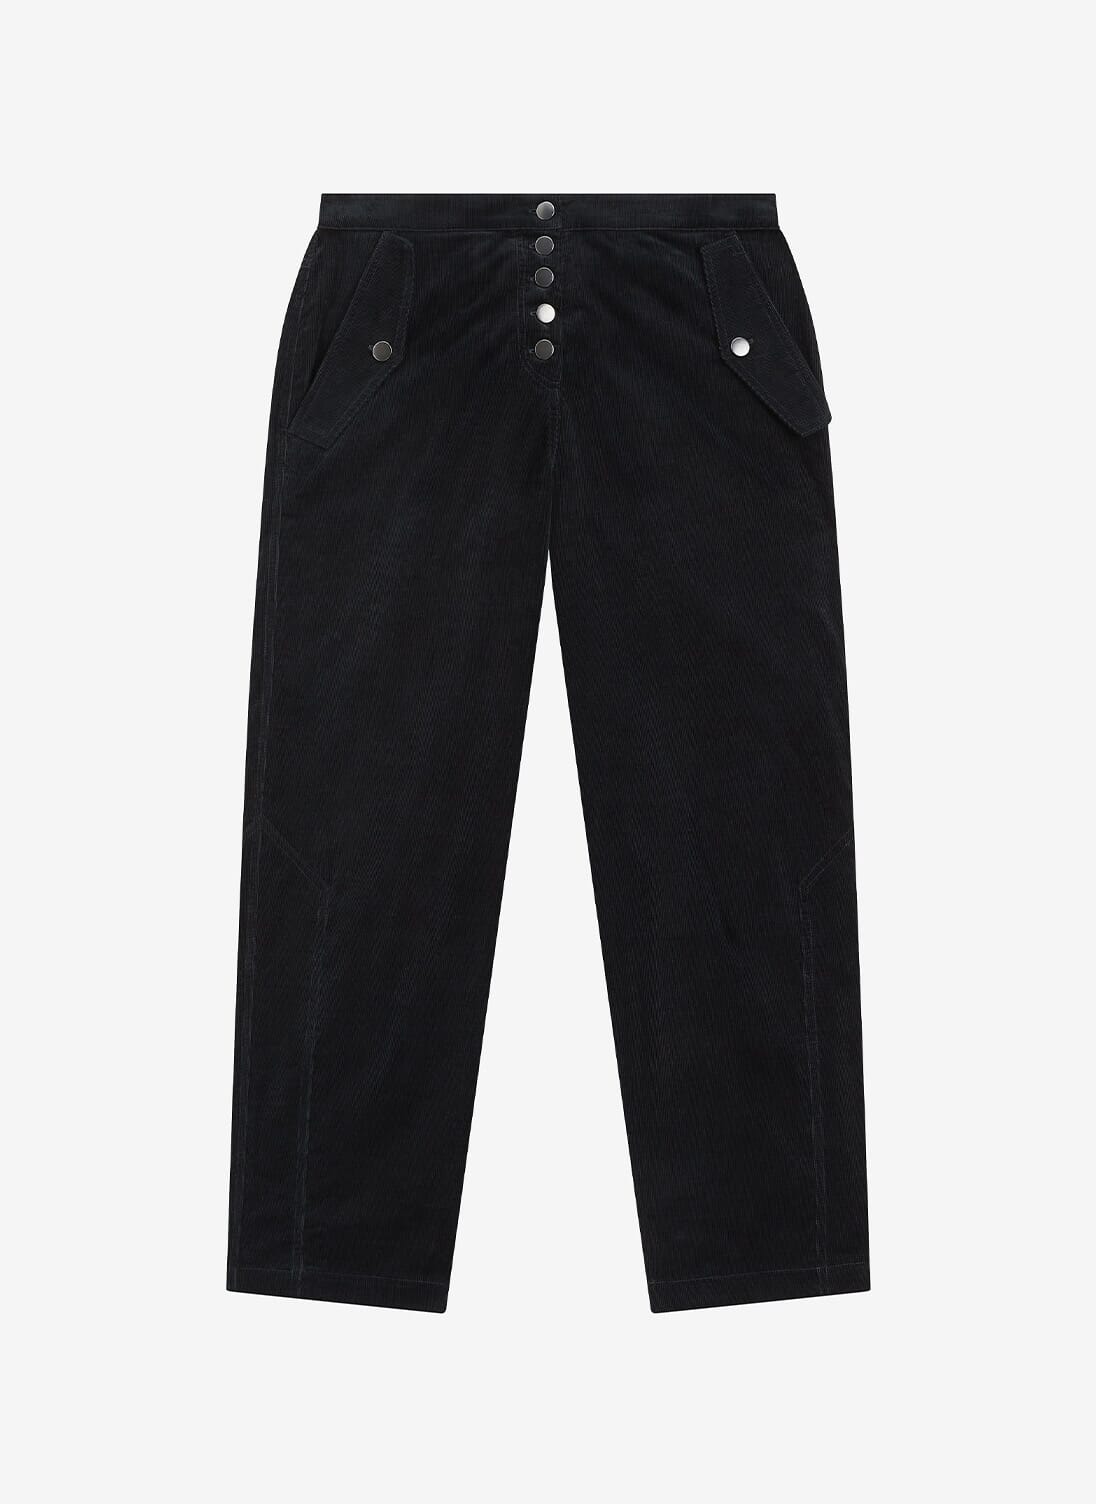 Ink Needlecord Utility Trousers | Women's Trousers | Brora